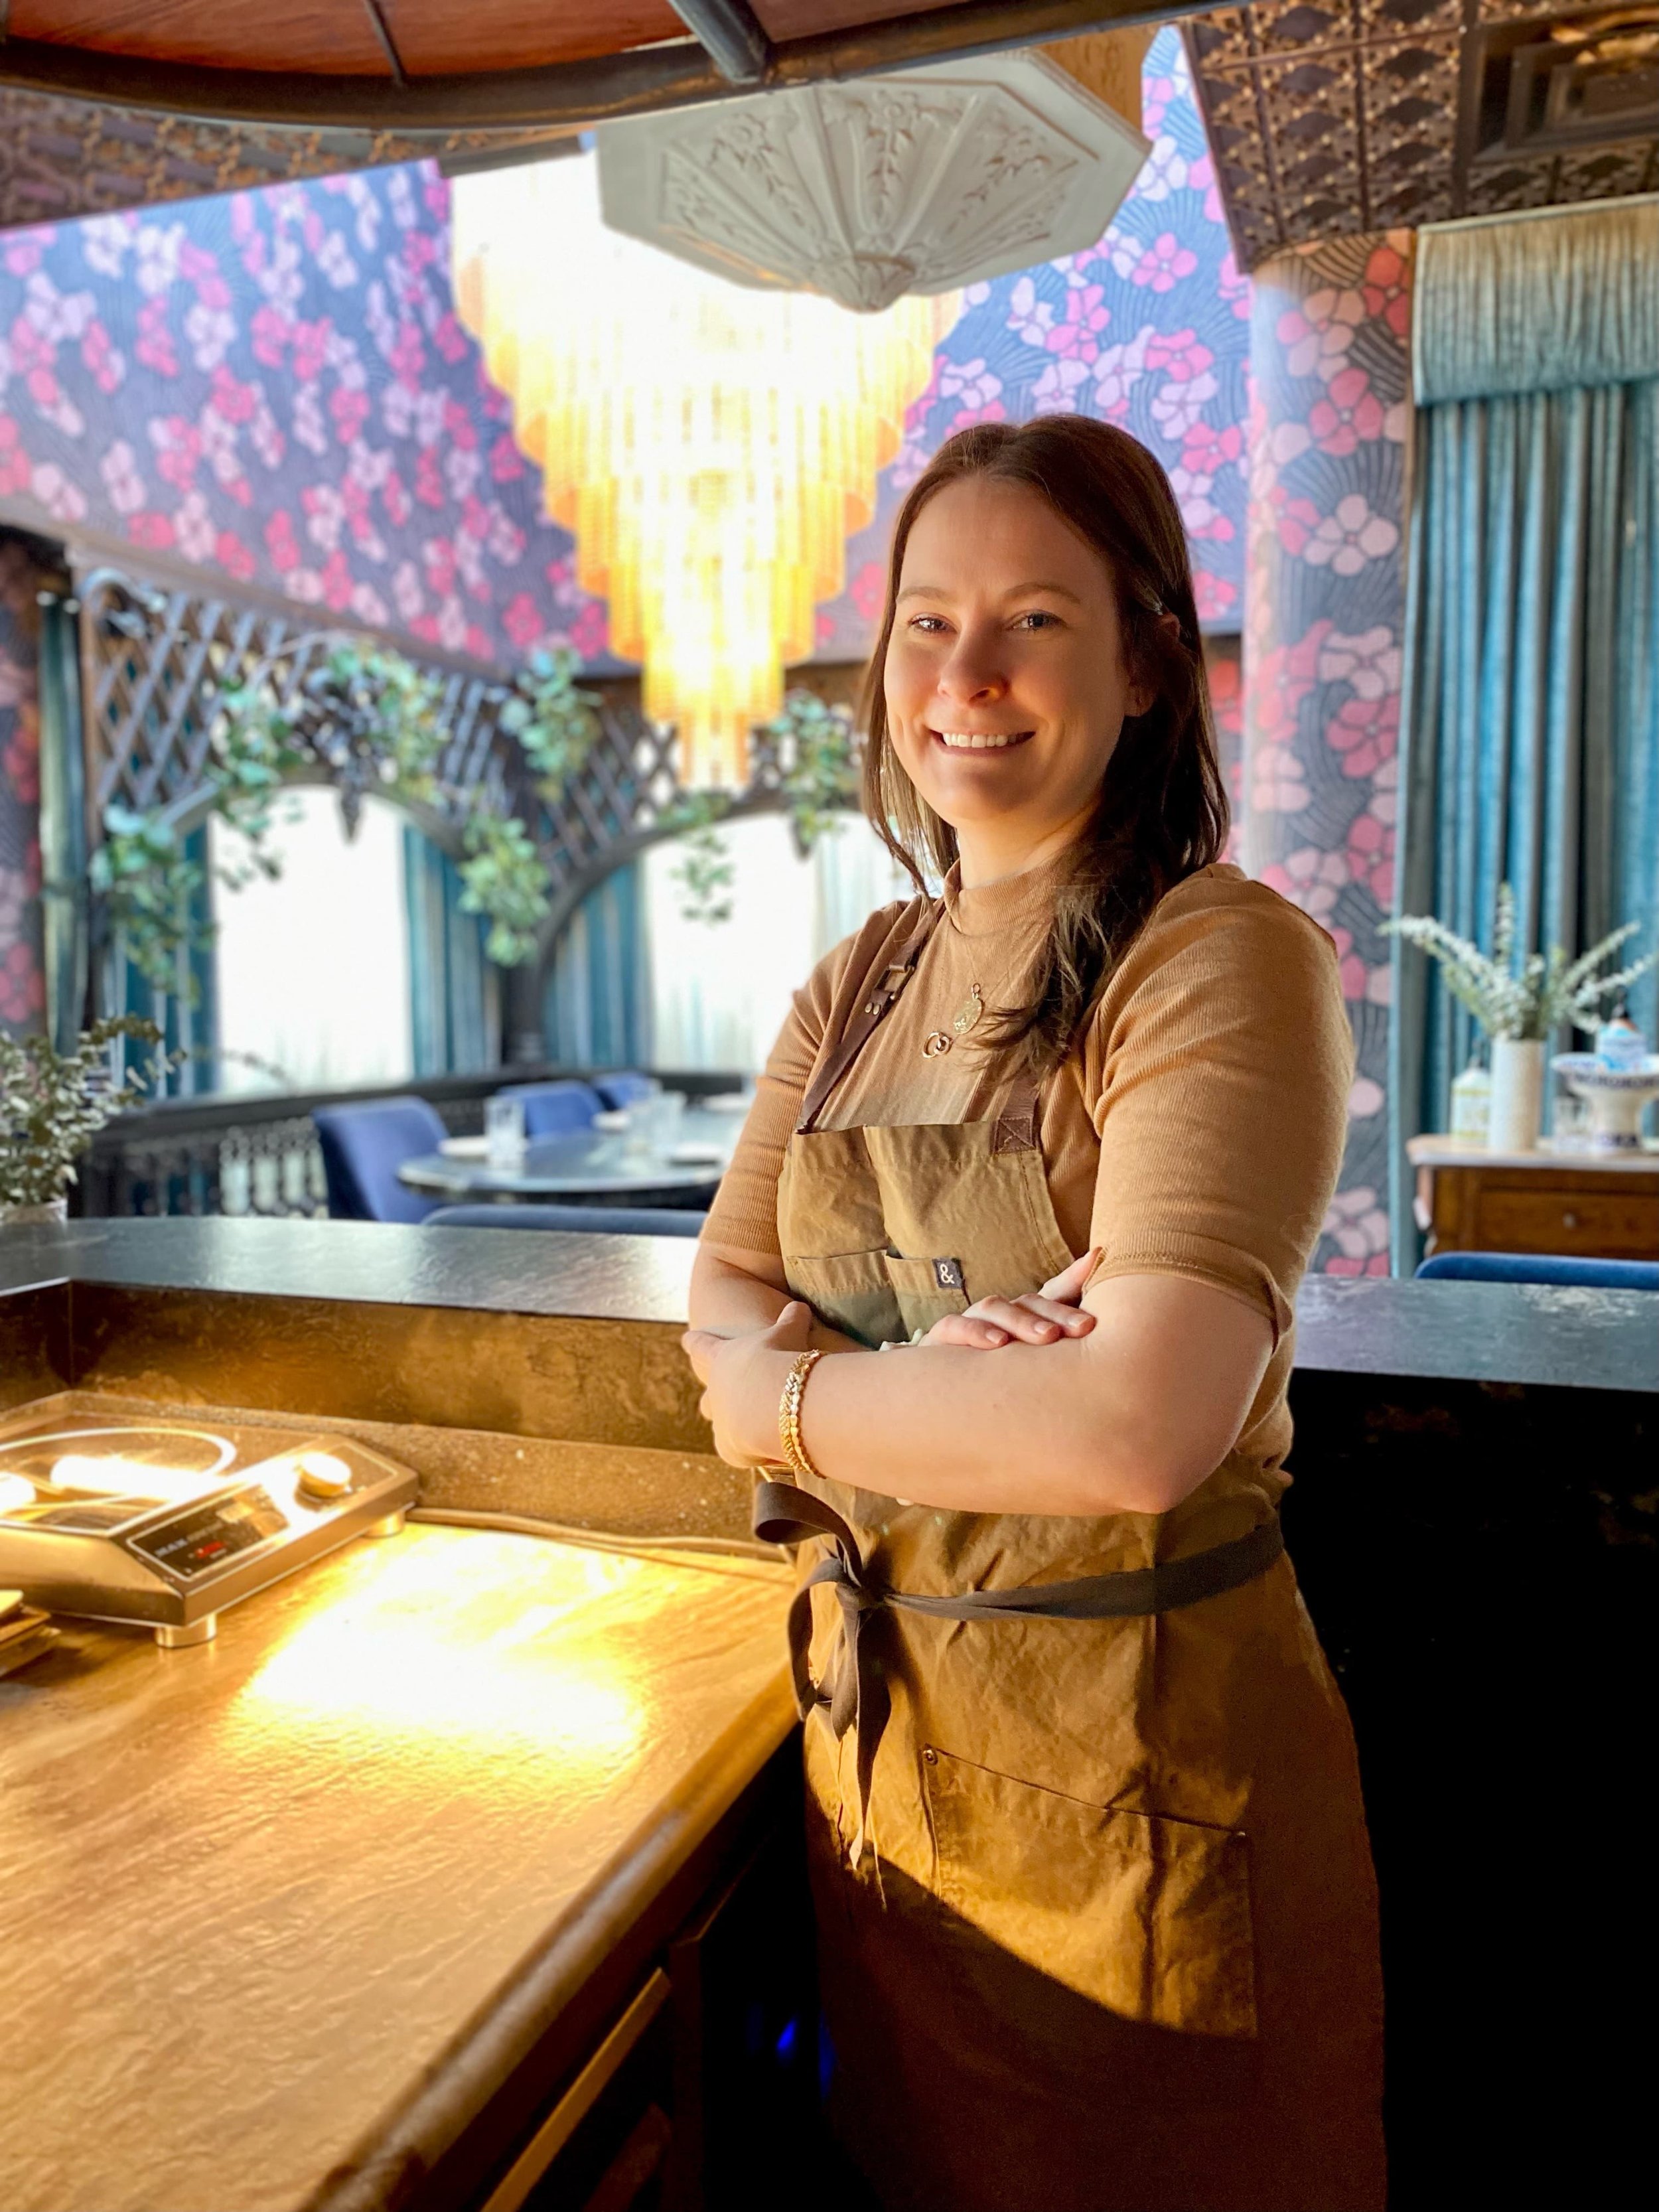 Sea breeze: Bonhomme Exec Pastry Chef Shannah Primiano heads to the ...